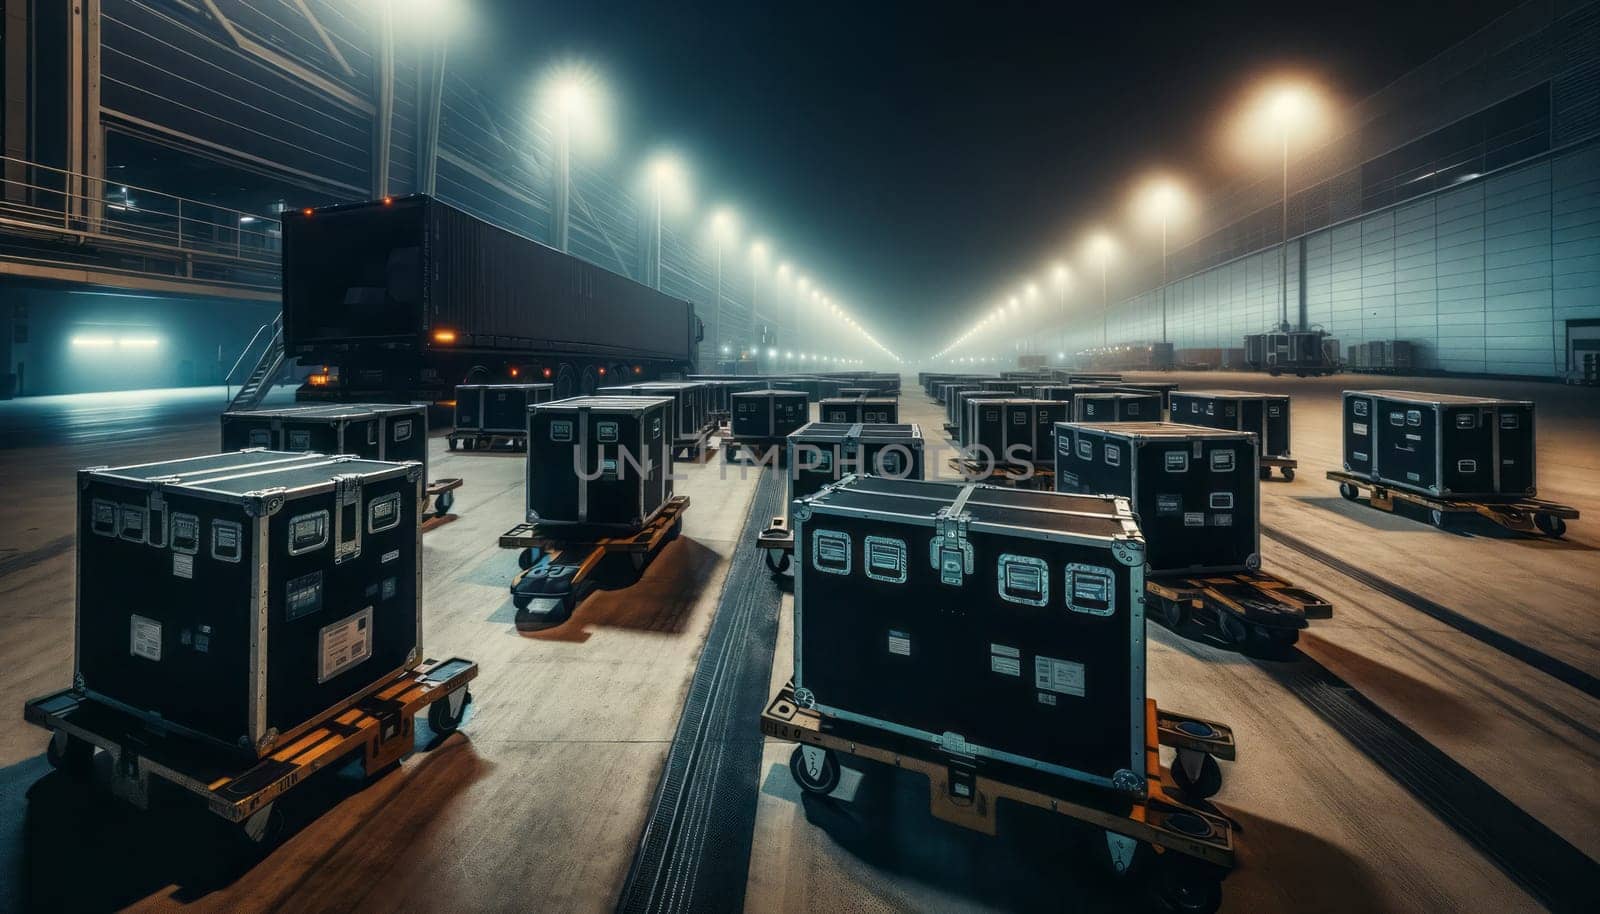 A wide-angle night photography of a logistic area with large equipment cases on dollies, ready for loading or just offloaded. The scene is illuminated by the harsh artificial lighting from street lamps and building lights, casting deep shadows and creating a moody atmosphere. The equipment cases are black with metal trim and look rugged and heavy-duty. In the background, there's the faint silhouette of a warehouse or event venue, with a soft mist or fog adding to the nocturnal ambience. The ground is concrete, reflecting the lights and contributing to the industrial feel of the setting.